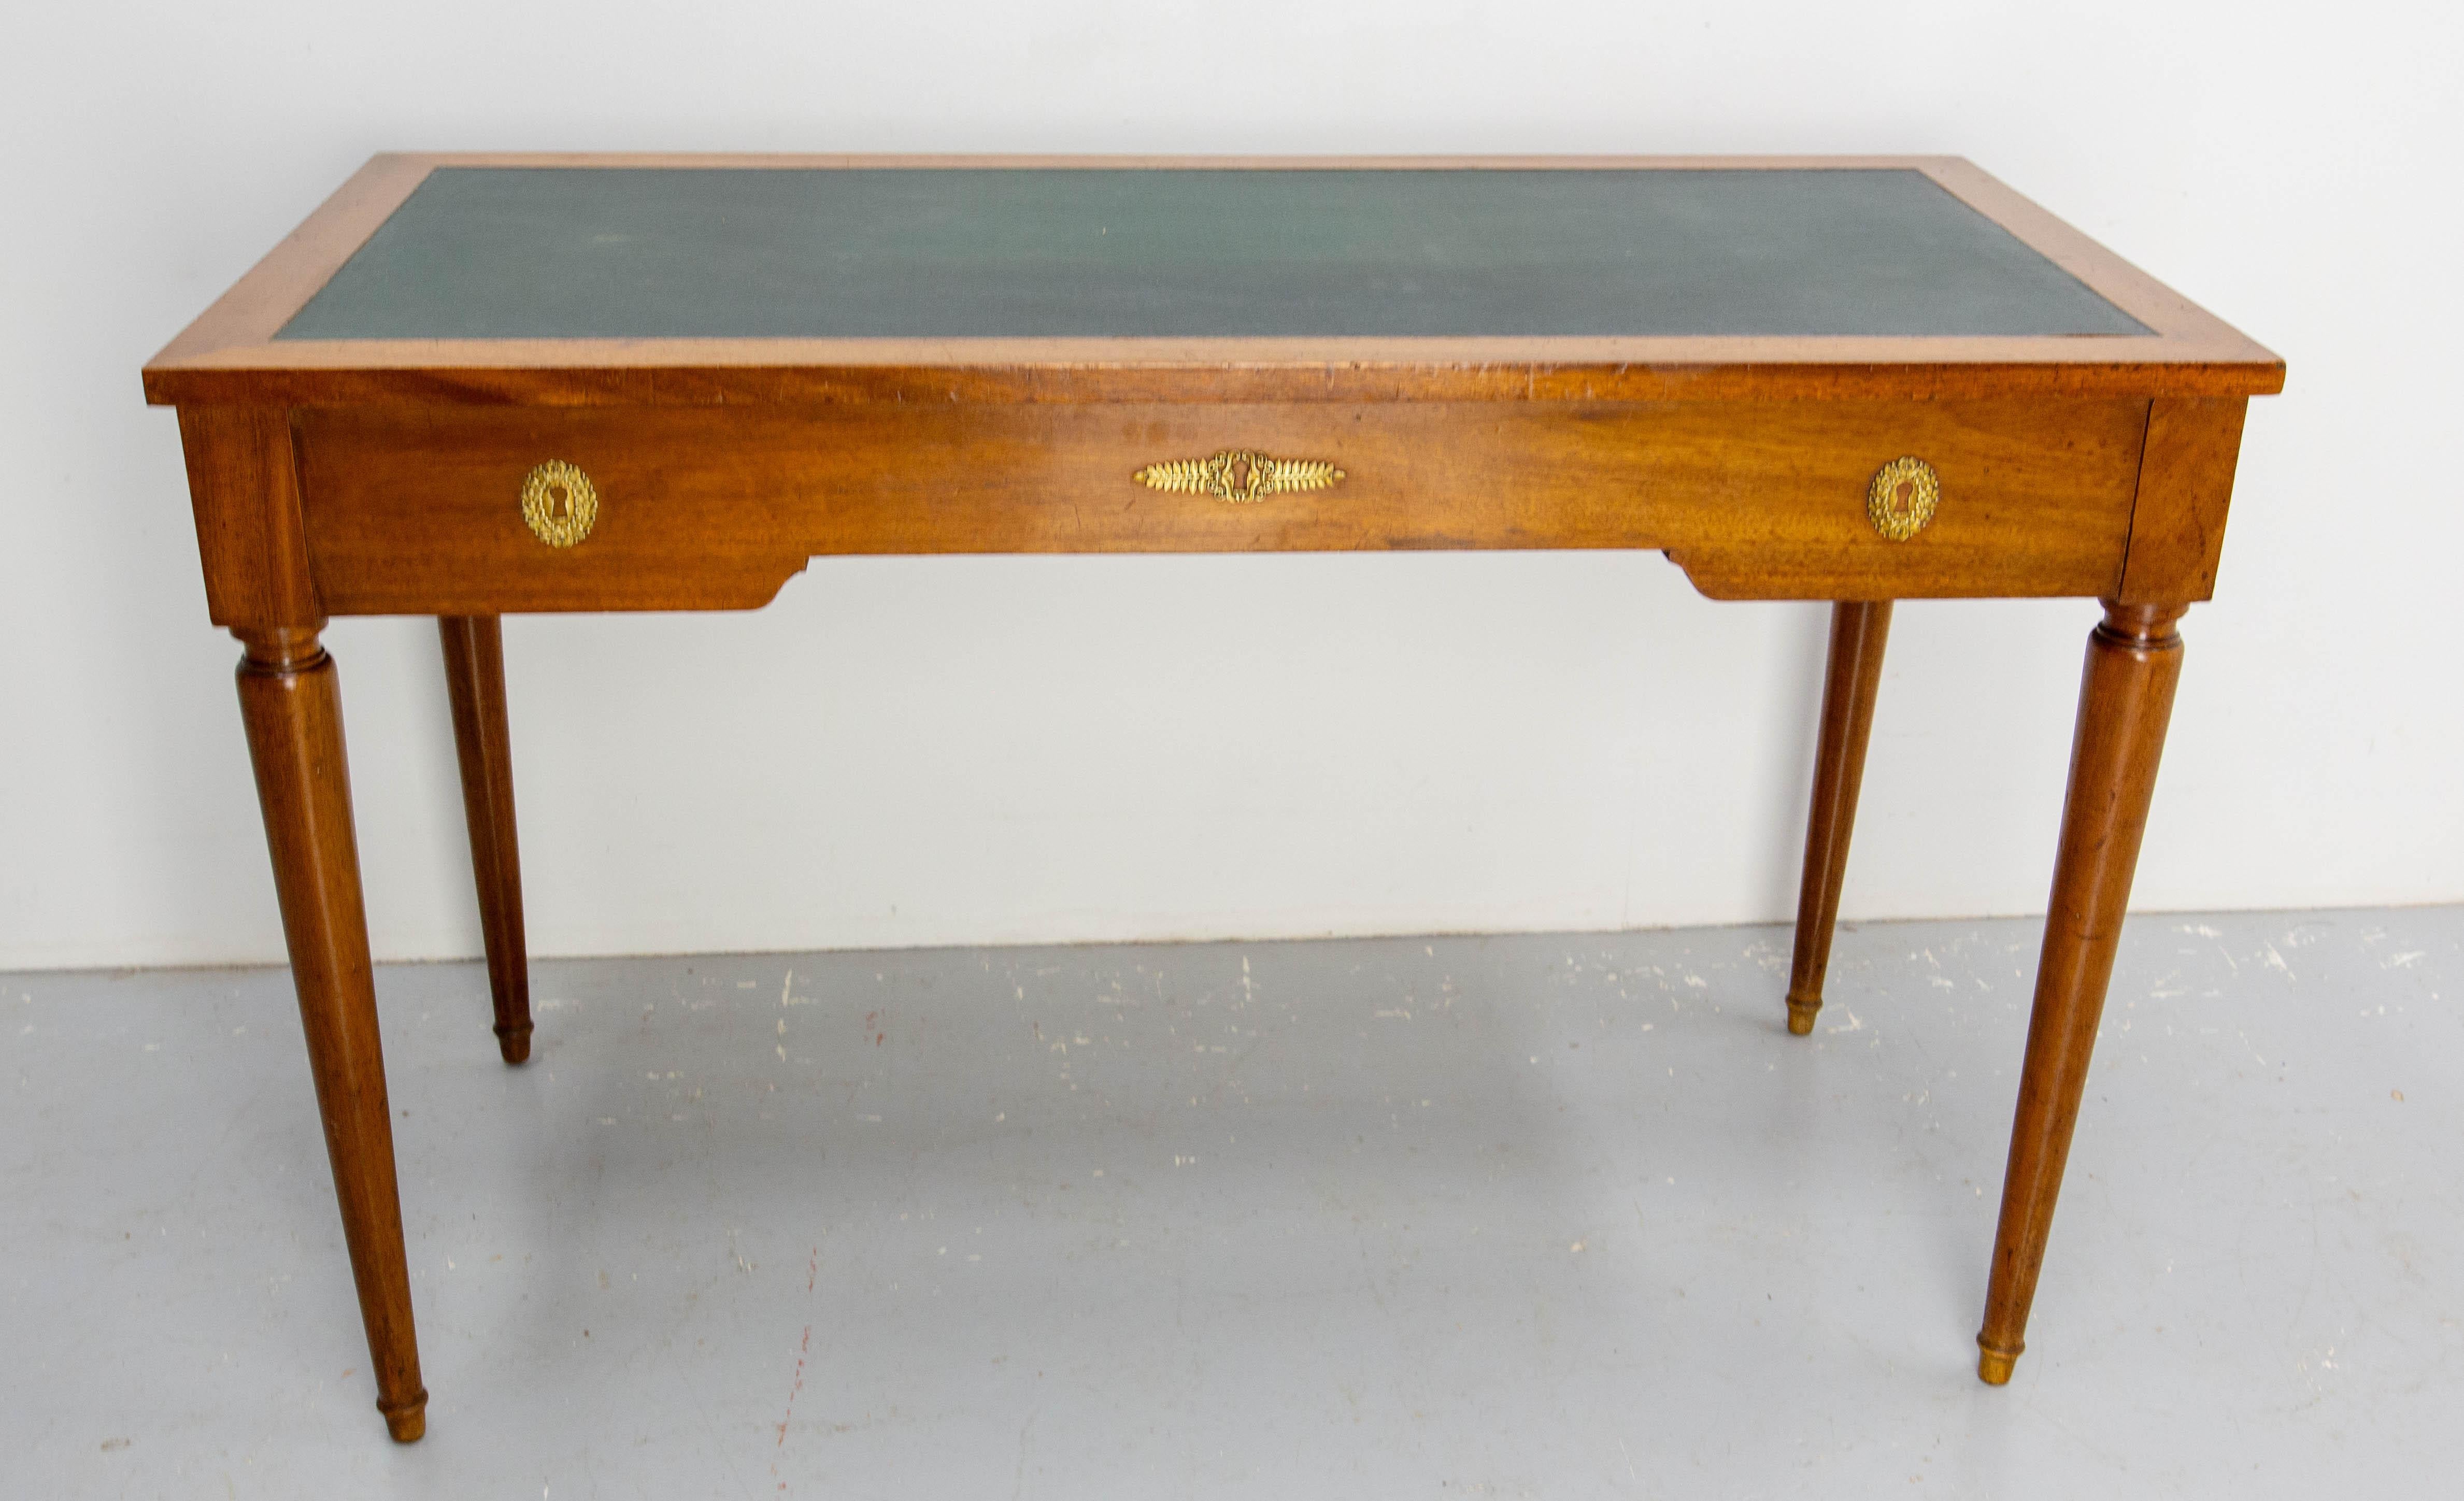 French mid-century exotic wood writing desk, the top is recovered of green oil cloth.
Three drawers on a side and false drawers on the other side which is a distinctive sign of Empire style furniture. The keys are not the original one.
The Krieger